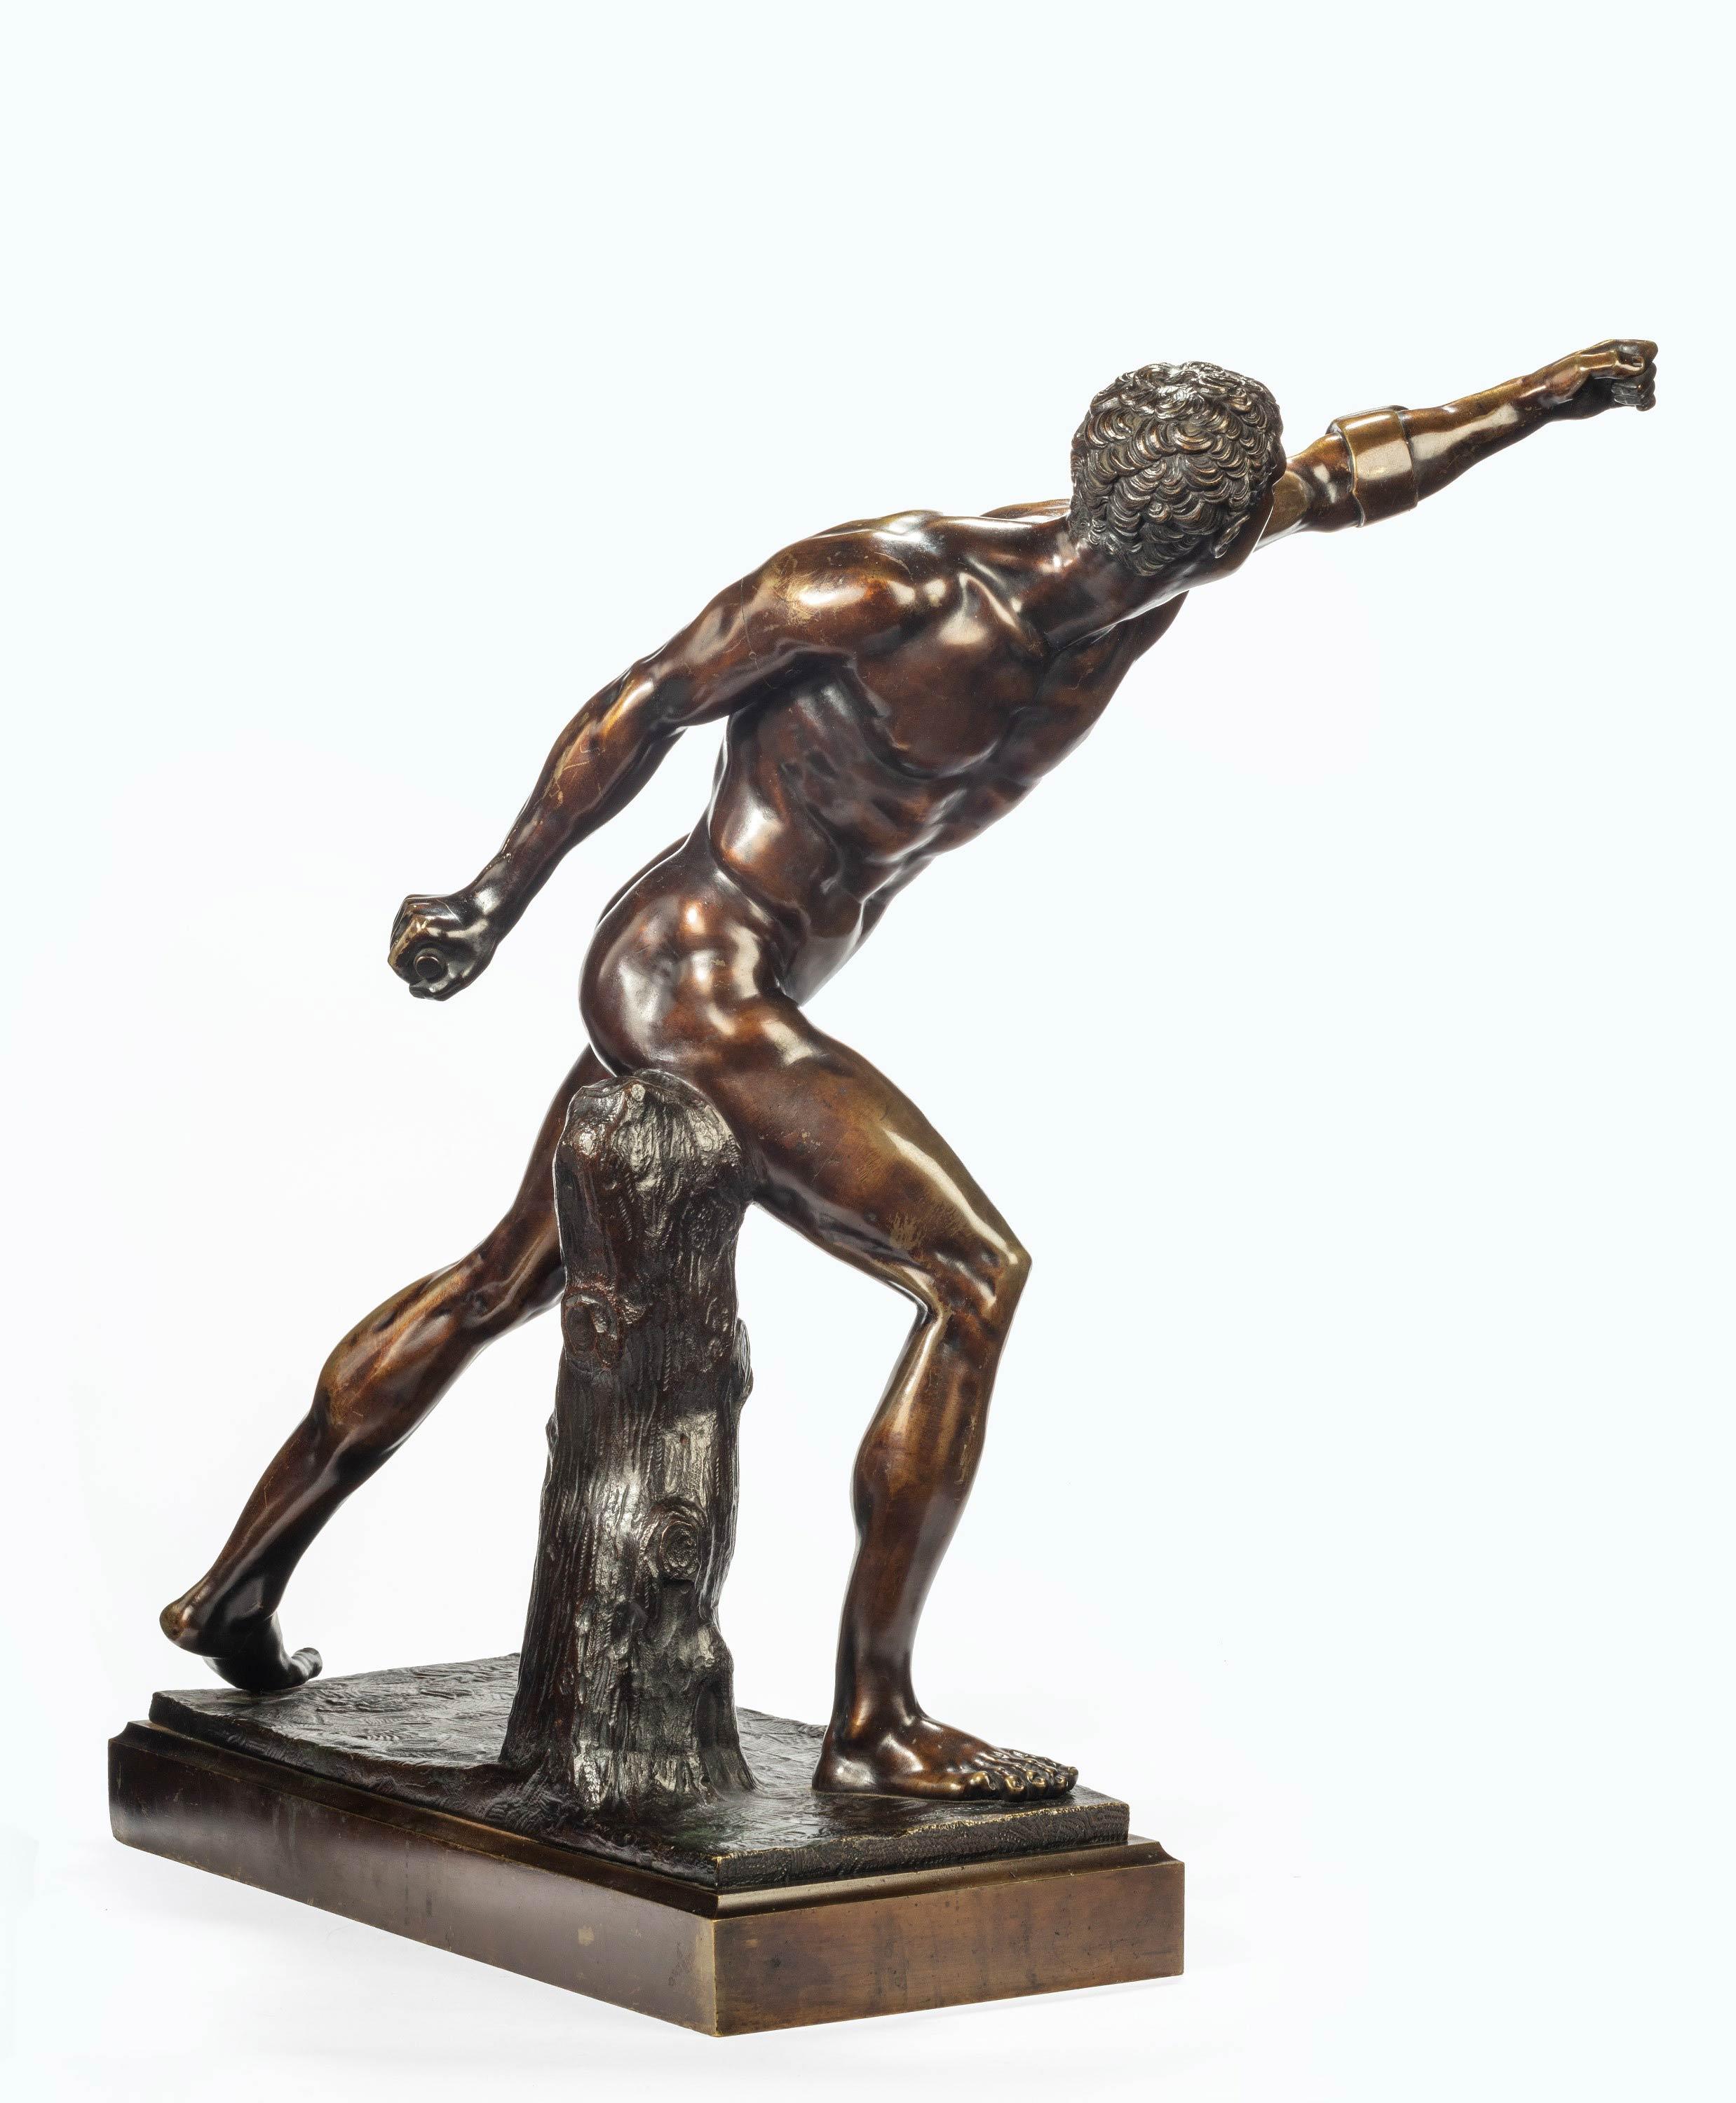 Very Well Cast 19th Century Bronze of a Gladiator 1